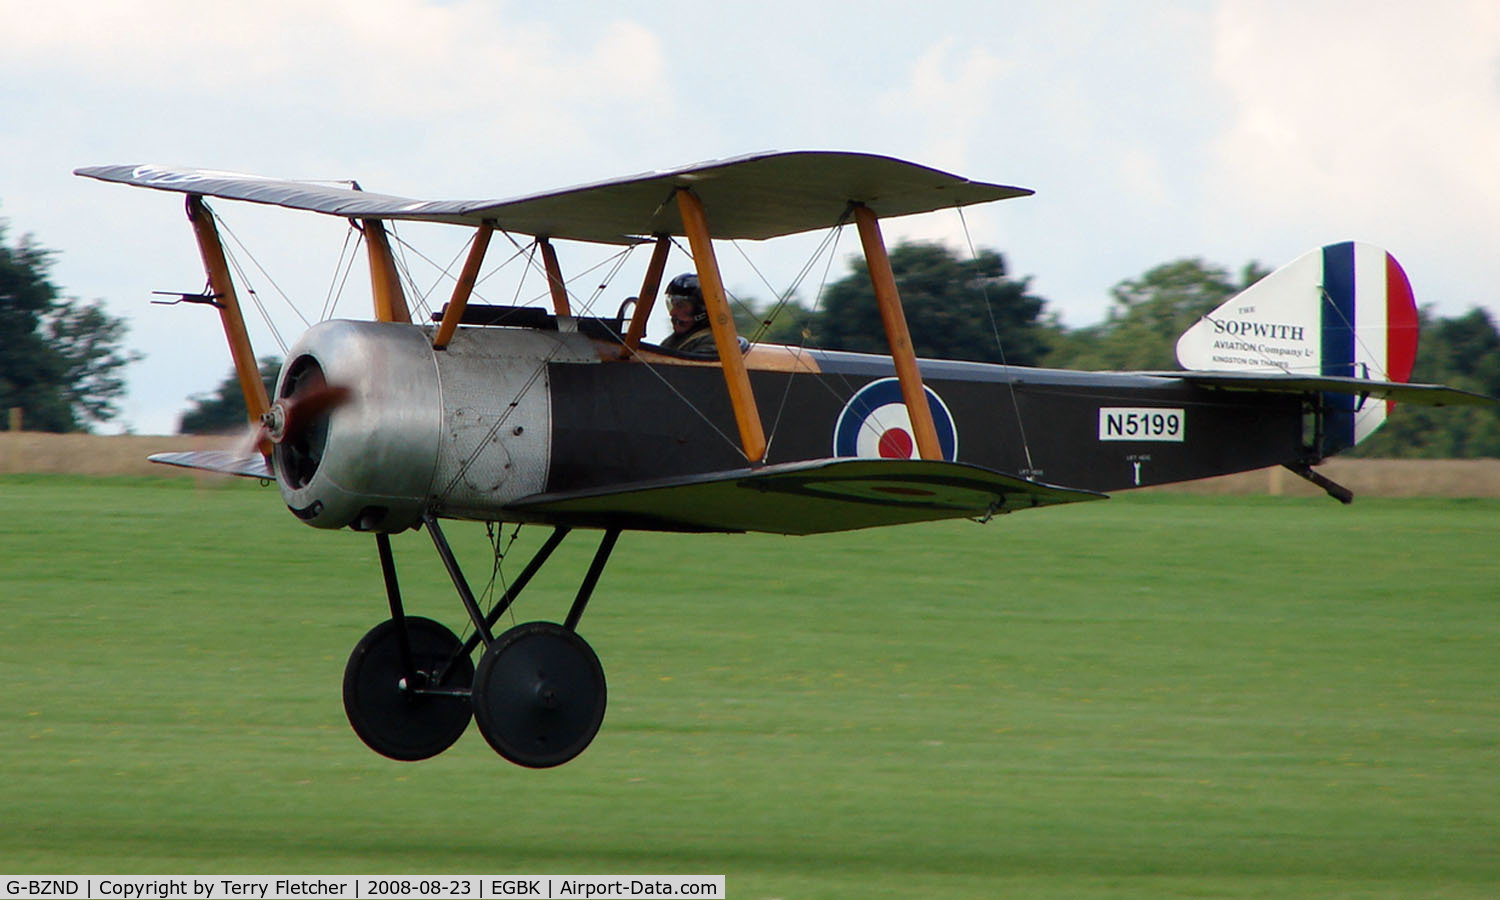 G-BZND, 2006 Sopwith Pup Replica C/N PFA 101-11815, Visitor to Sywell on 2008 Ragwing Fly-in day